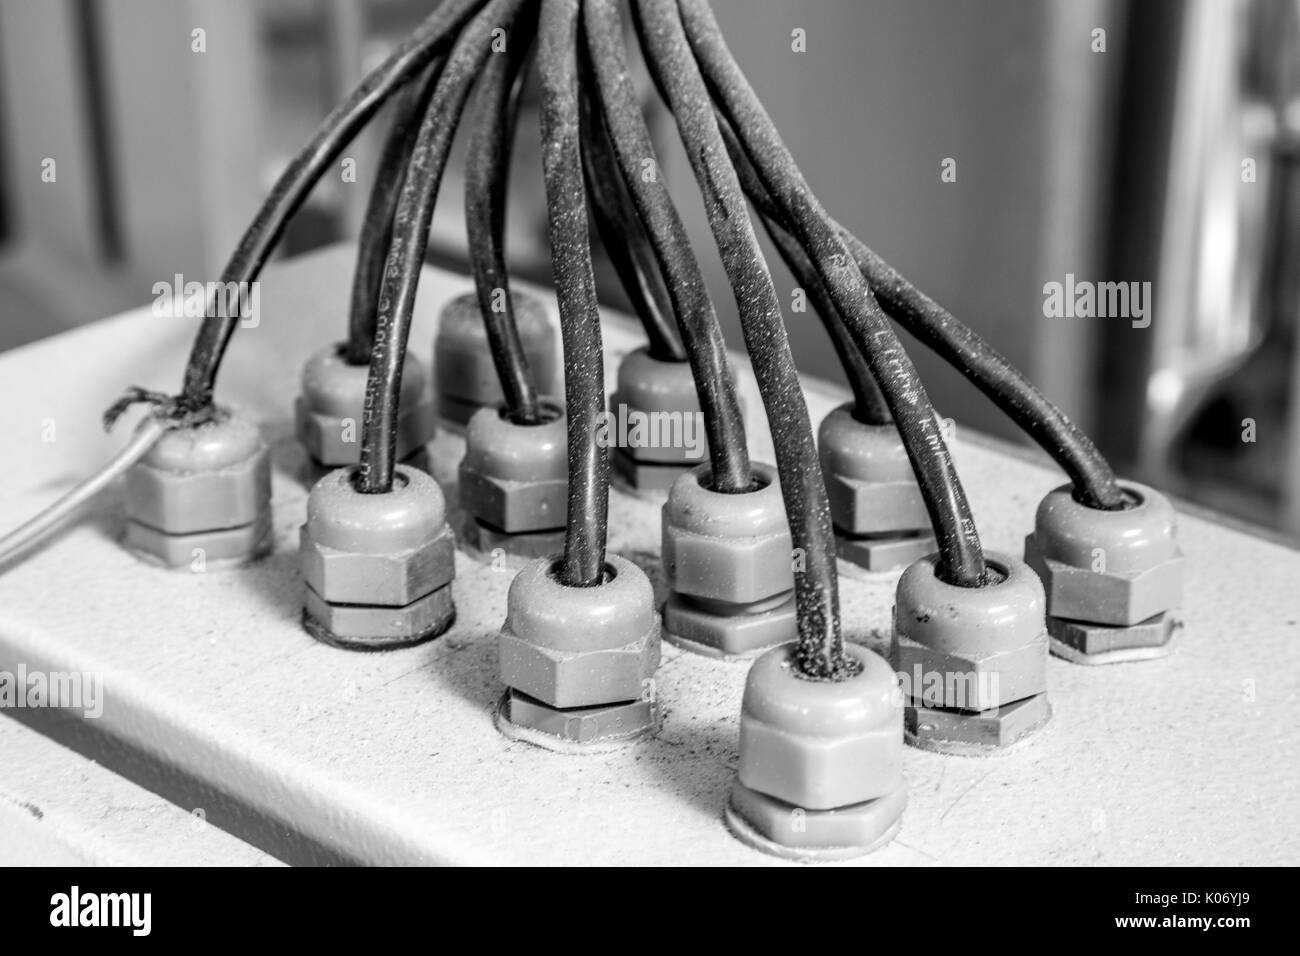 Electrical connection line switch Stock Photo